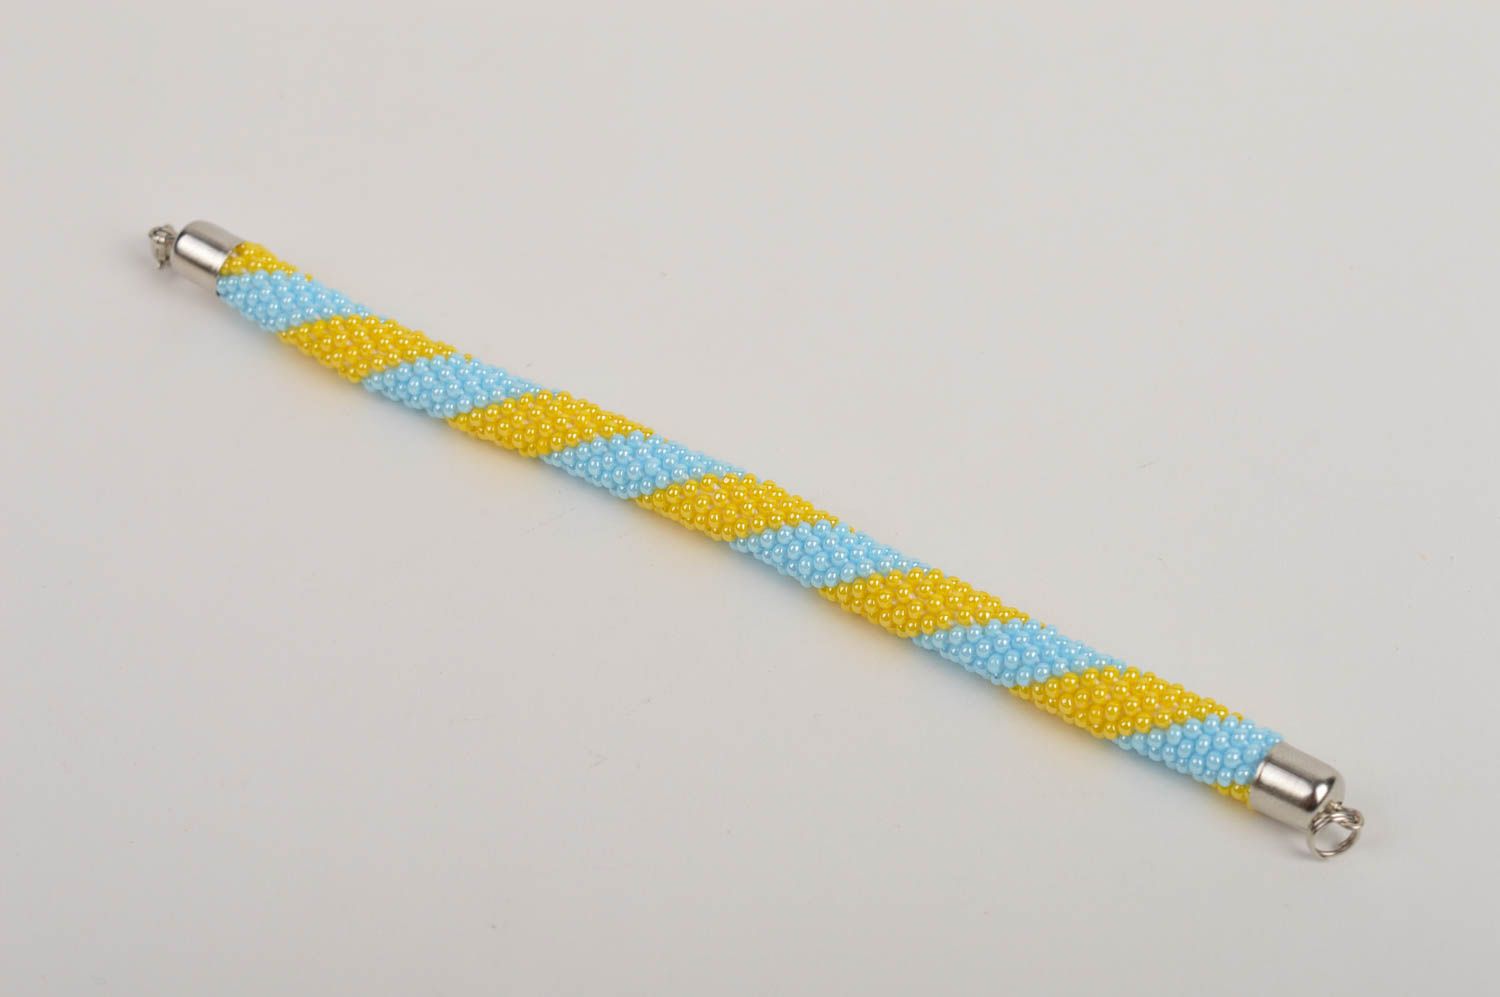 Homemade cord made of Czech beads adjustable bracelet in yellow and blue color photo 2